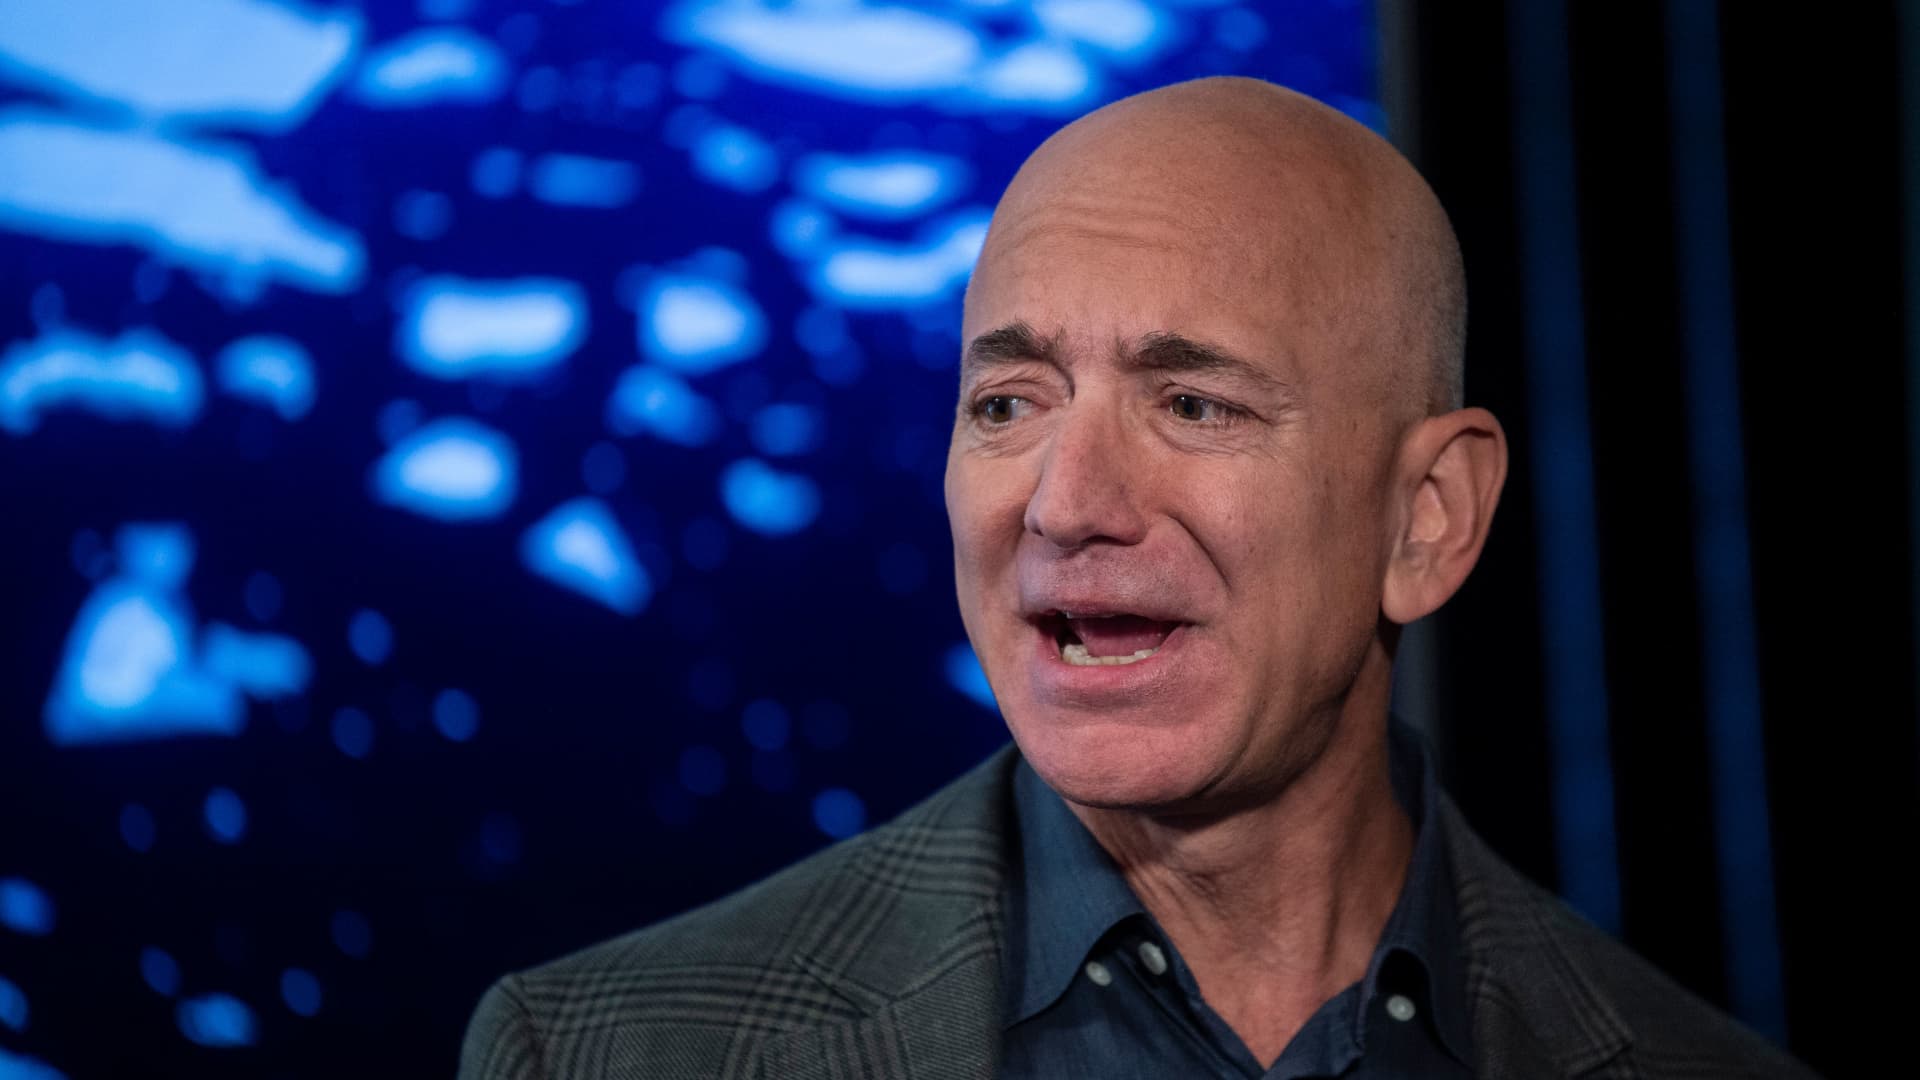 Jeff Bezos urged Amazon to flood search results with junk ads, FTC alleges